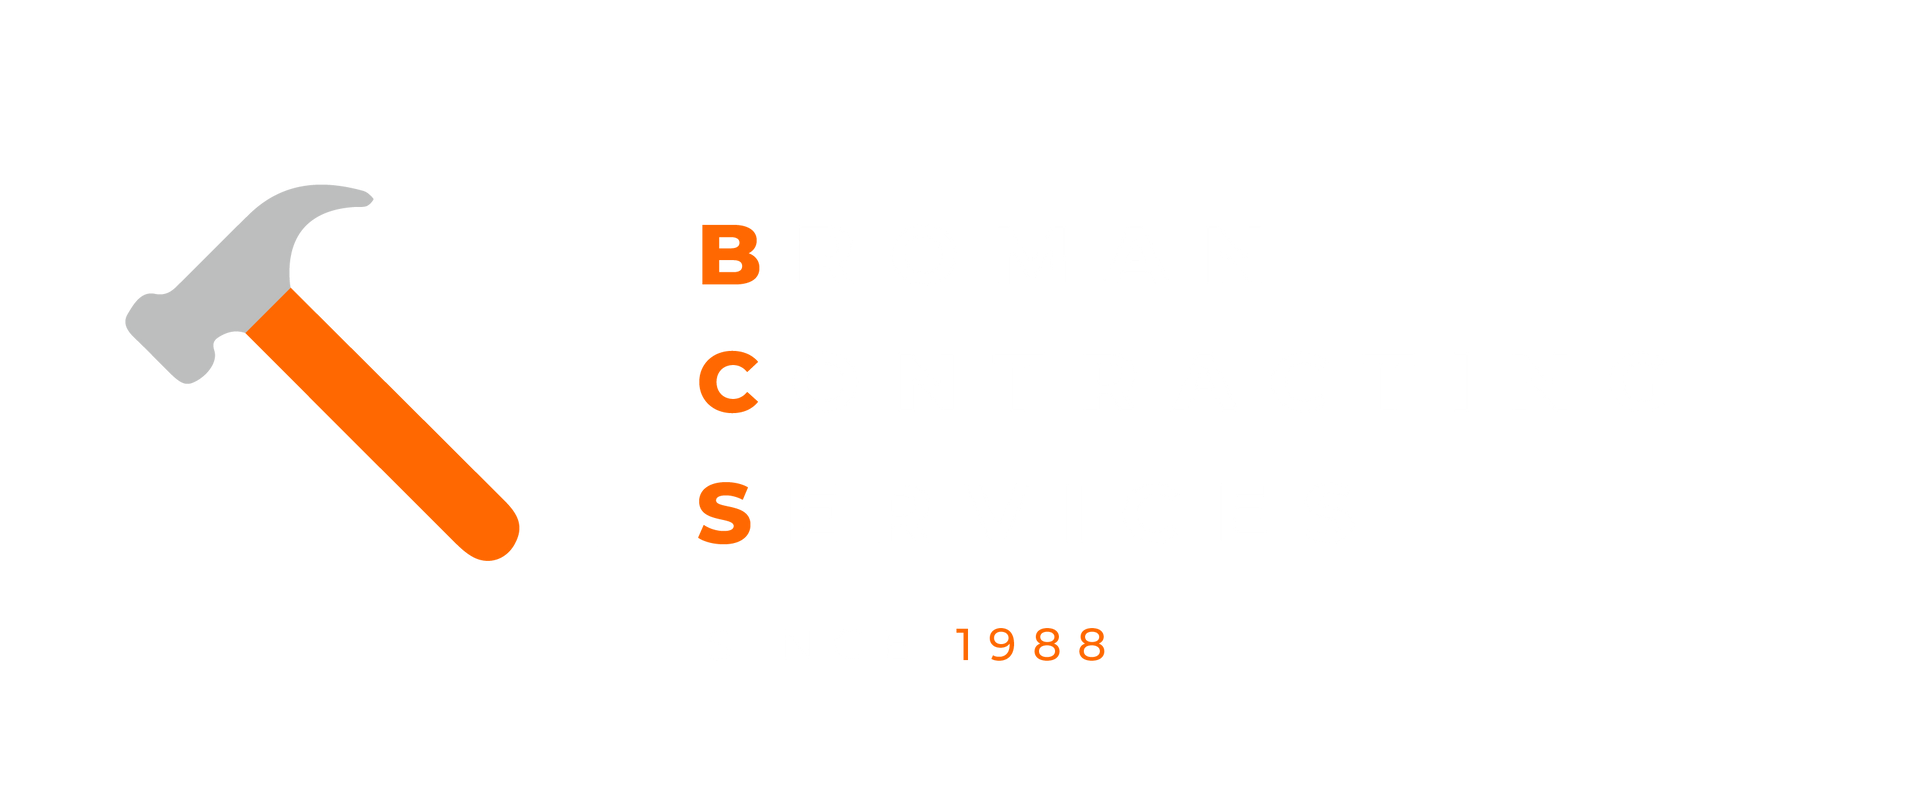 broman contracting services, window replacement richmond va, siding contractors near me, replacement siding